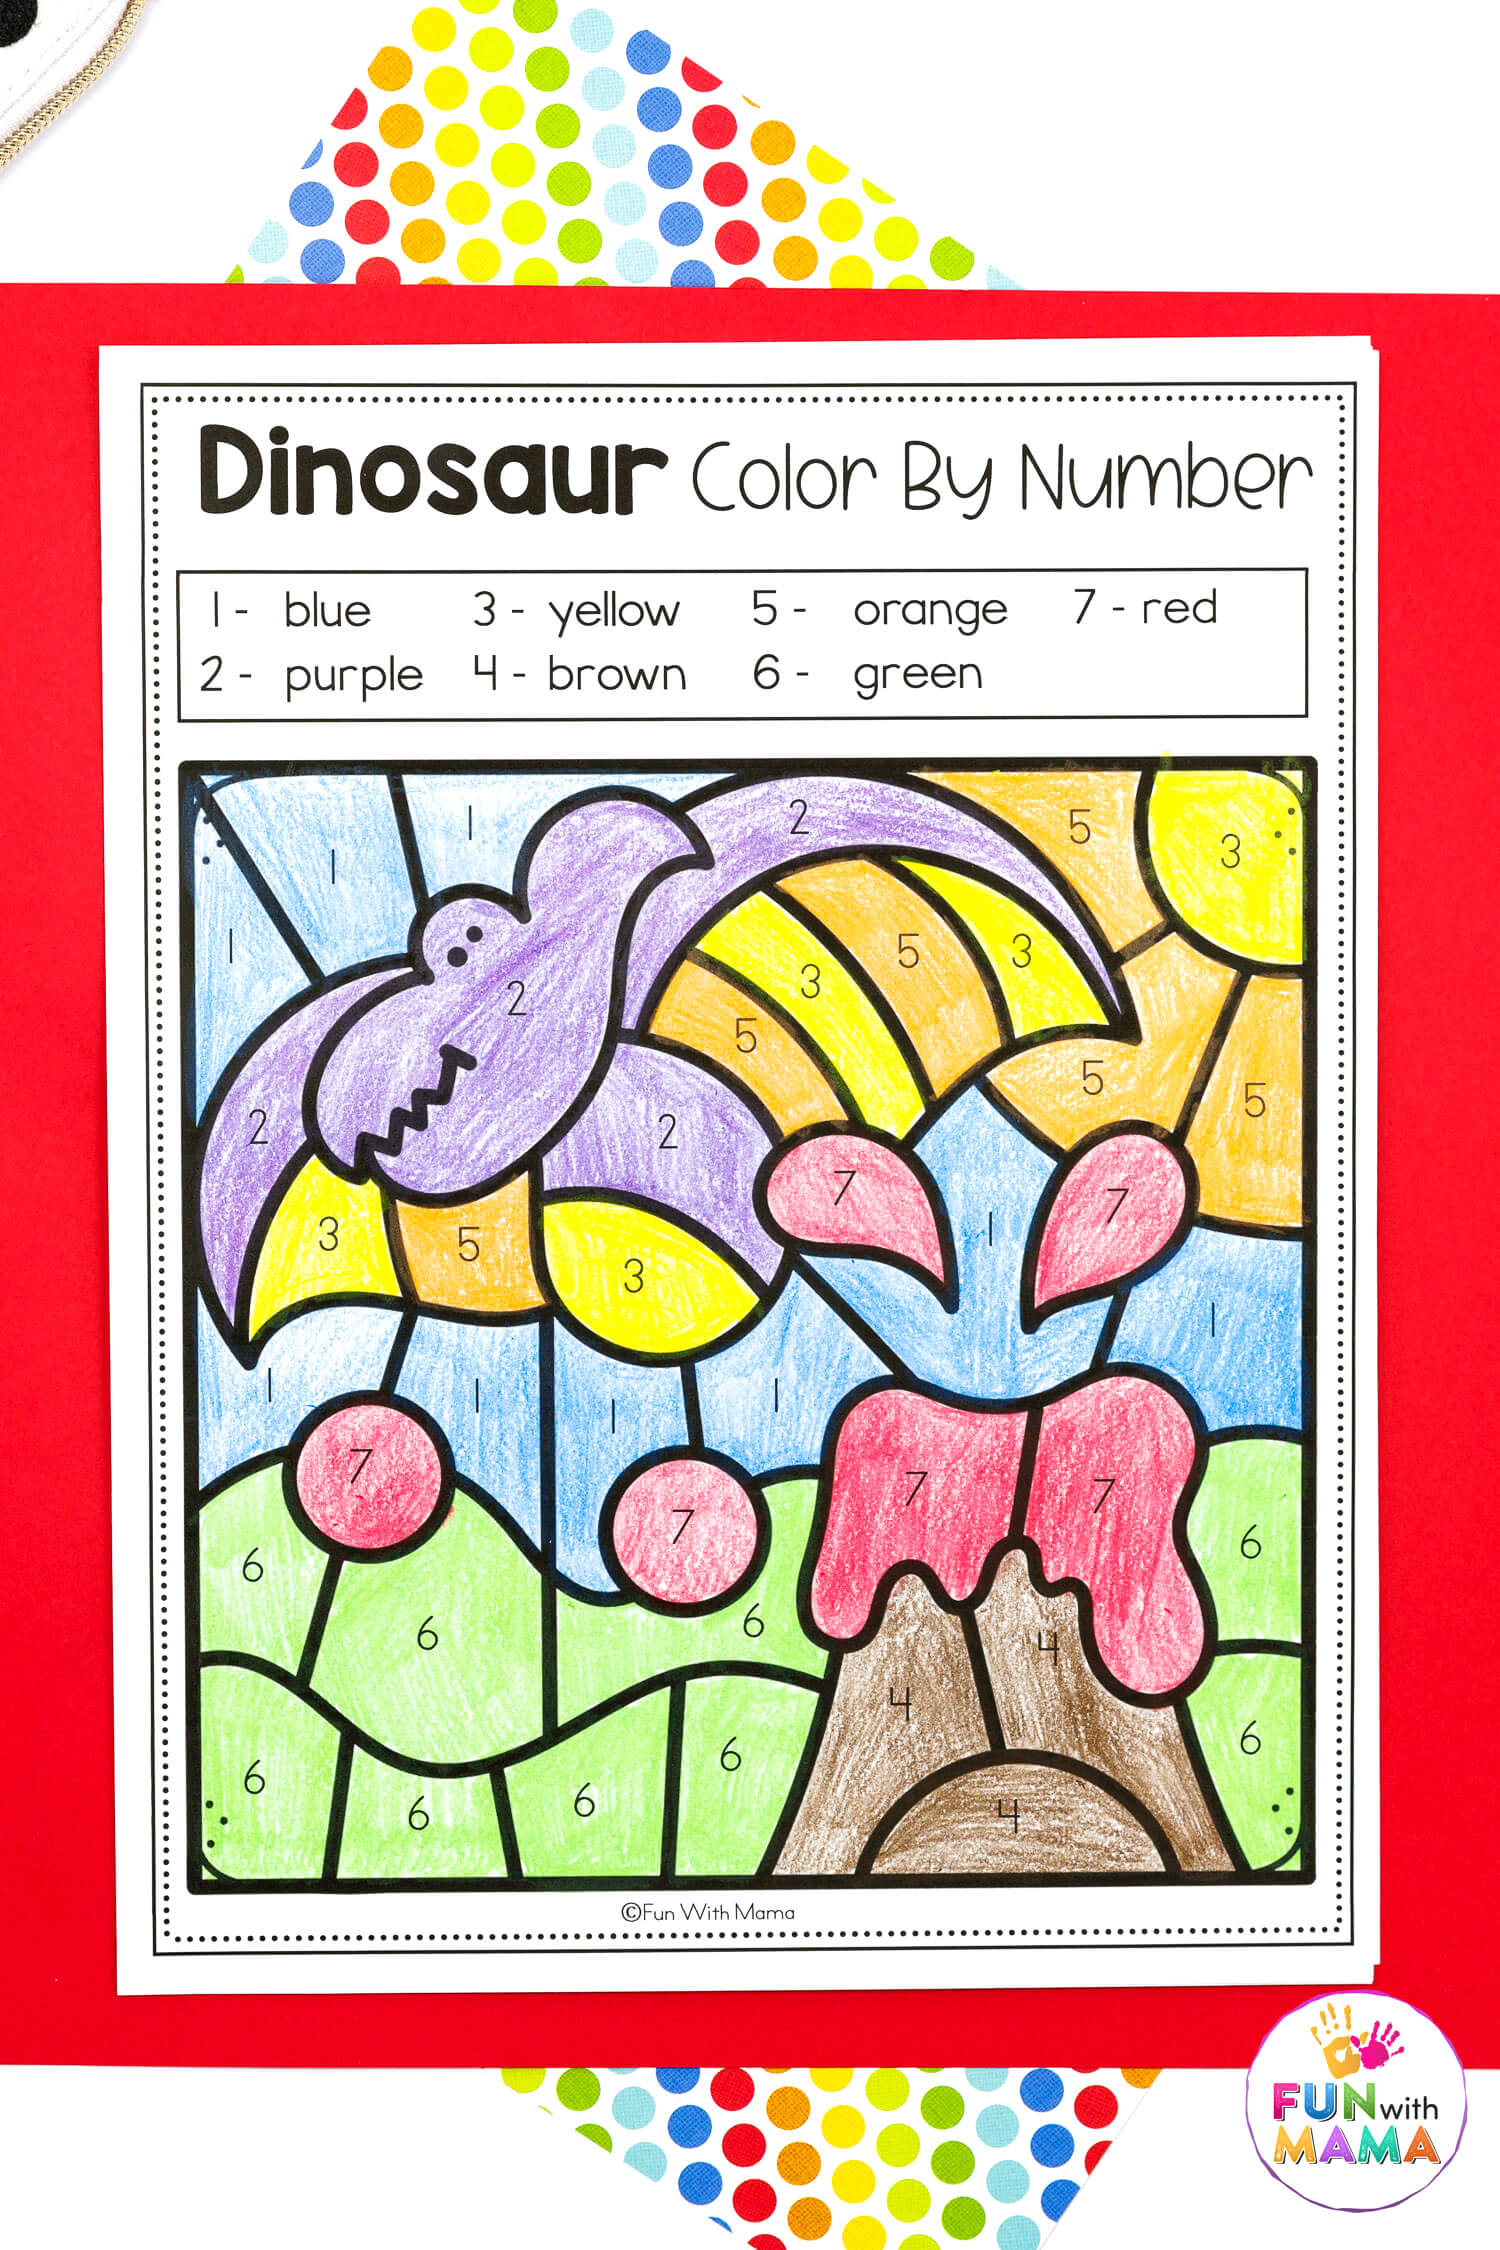 color by number with dinosaurs, filled in with purple,blue,red, green, orange, yellow and brown 